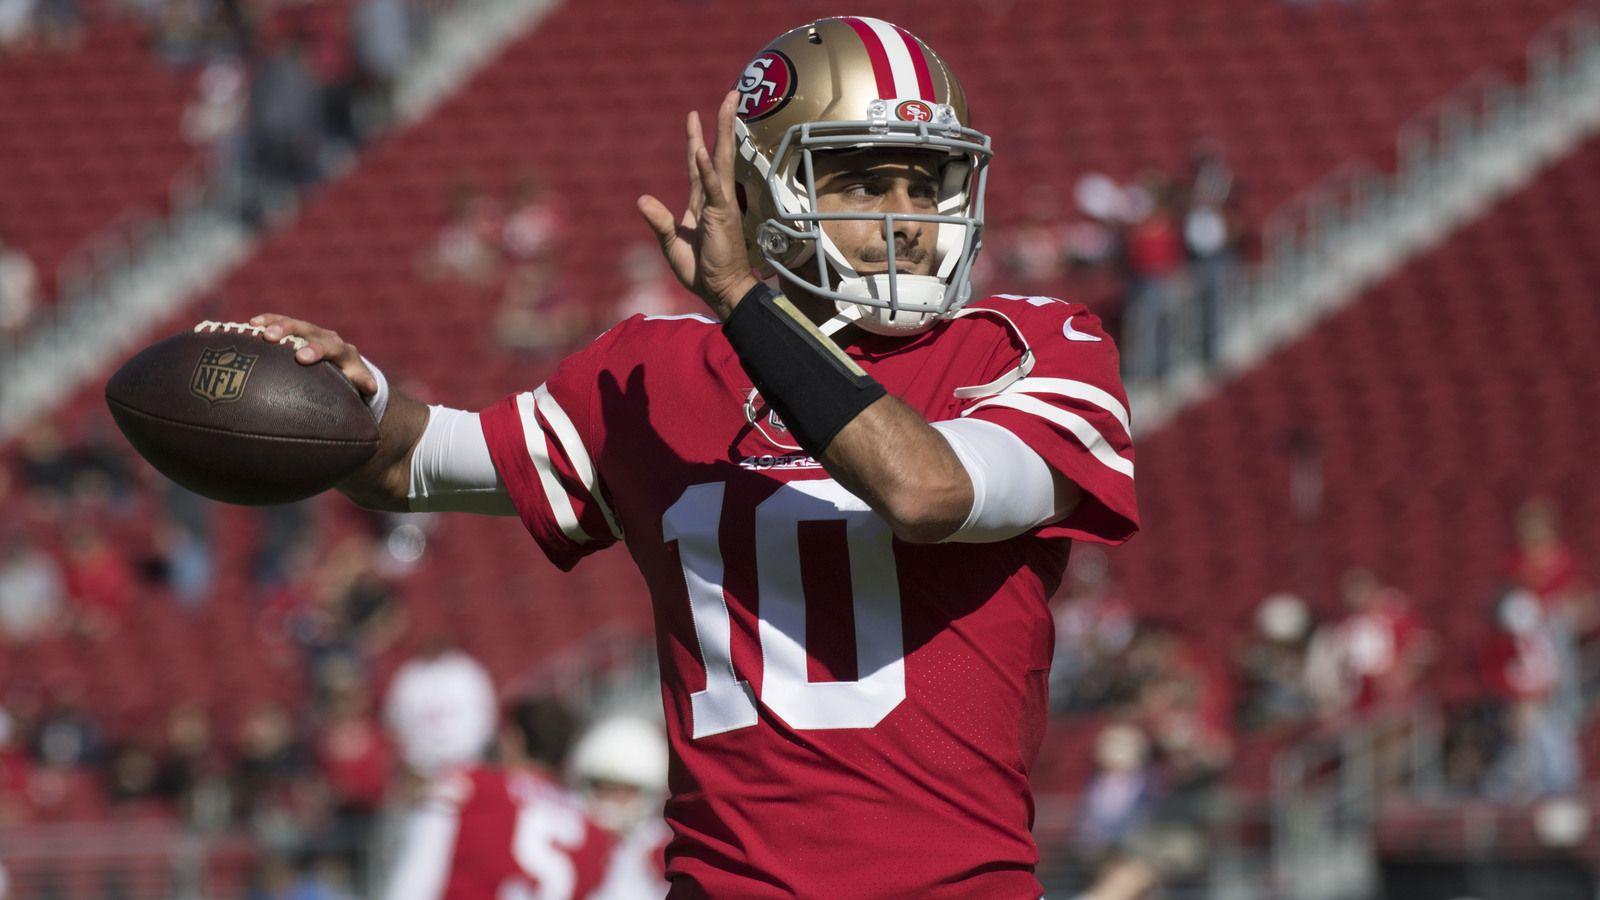 Report: 49ers aiming to have Jimmy Garoppolo start Week 12